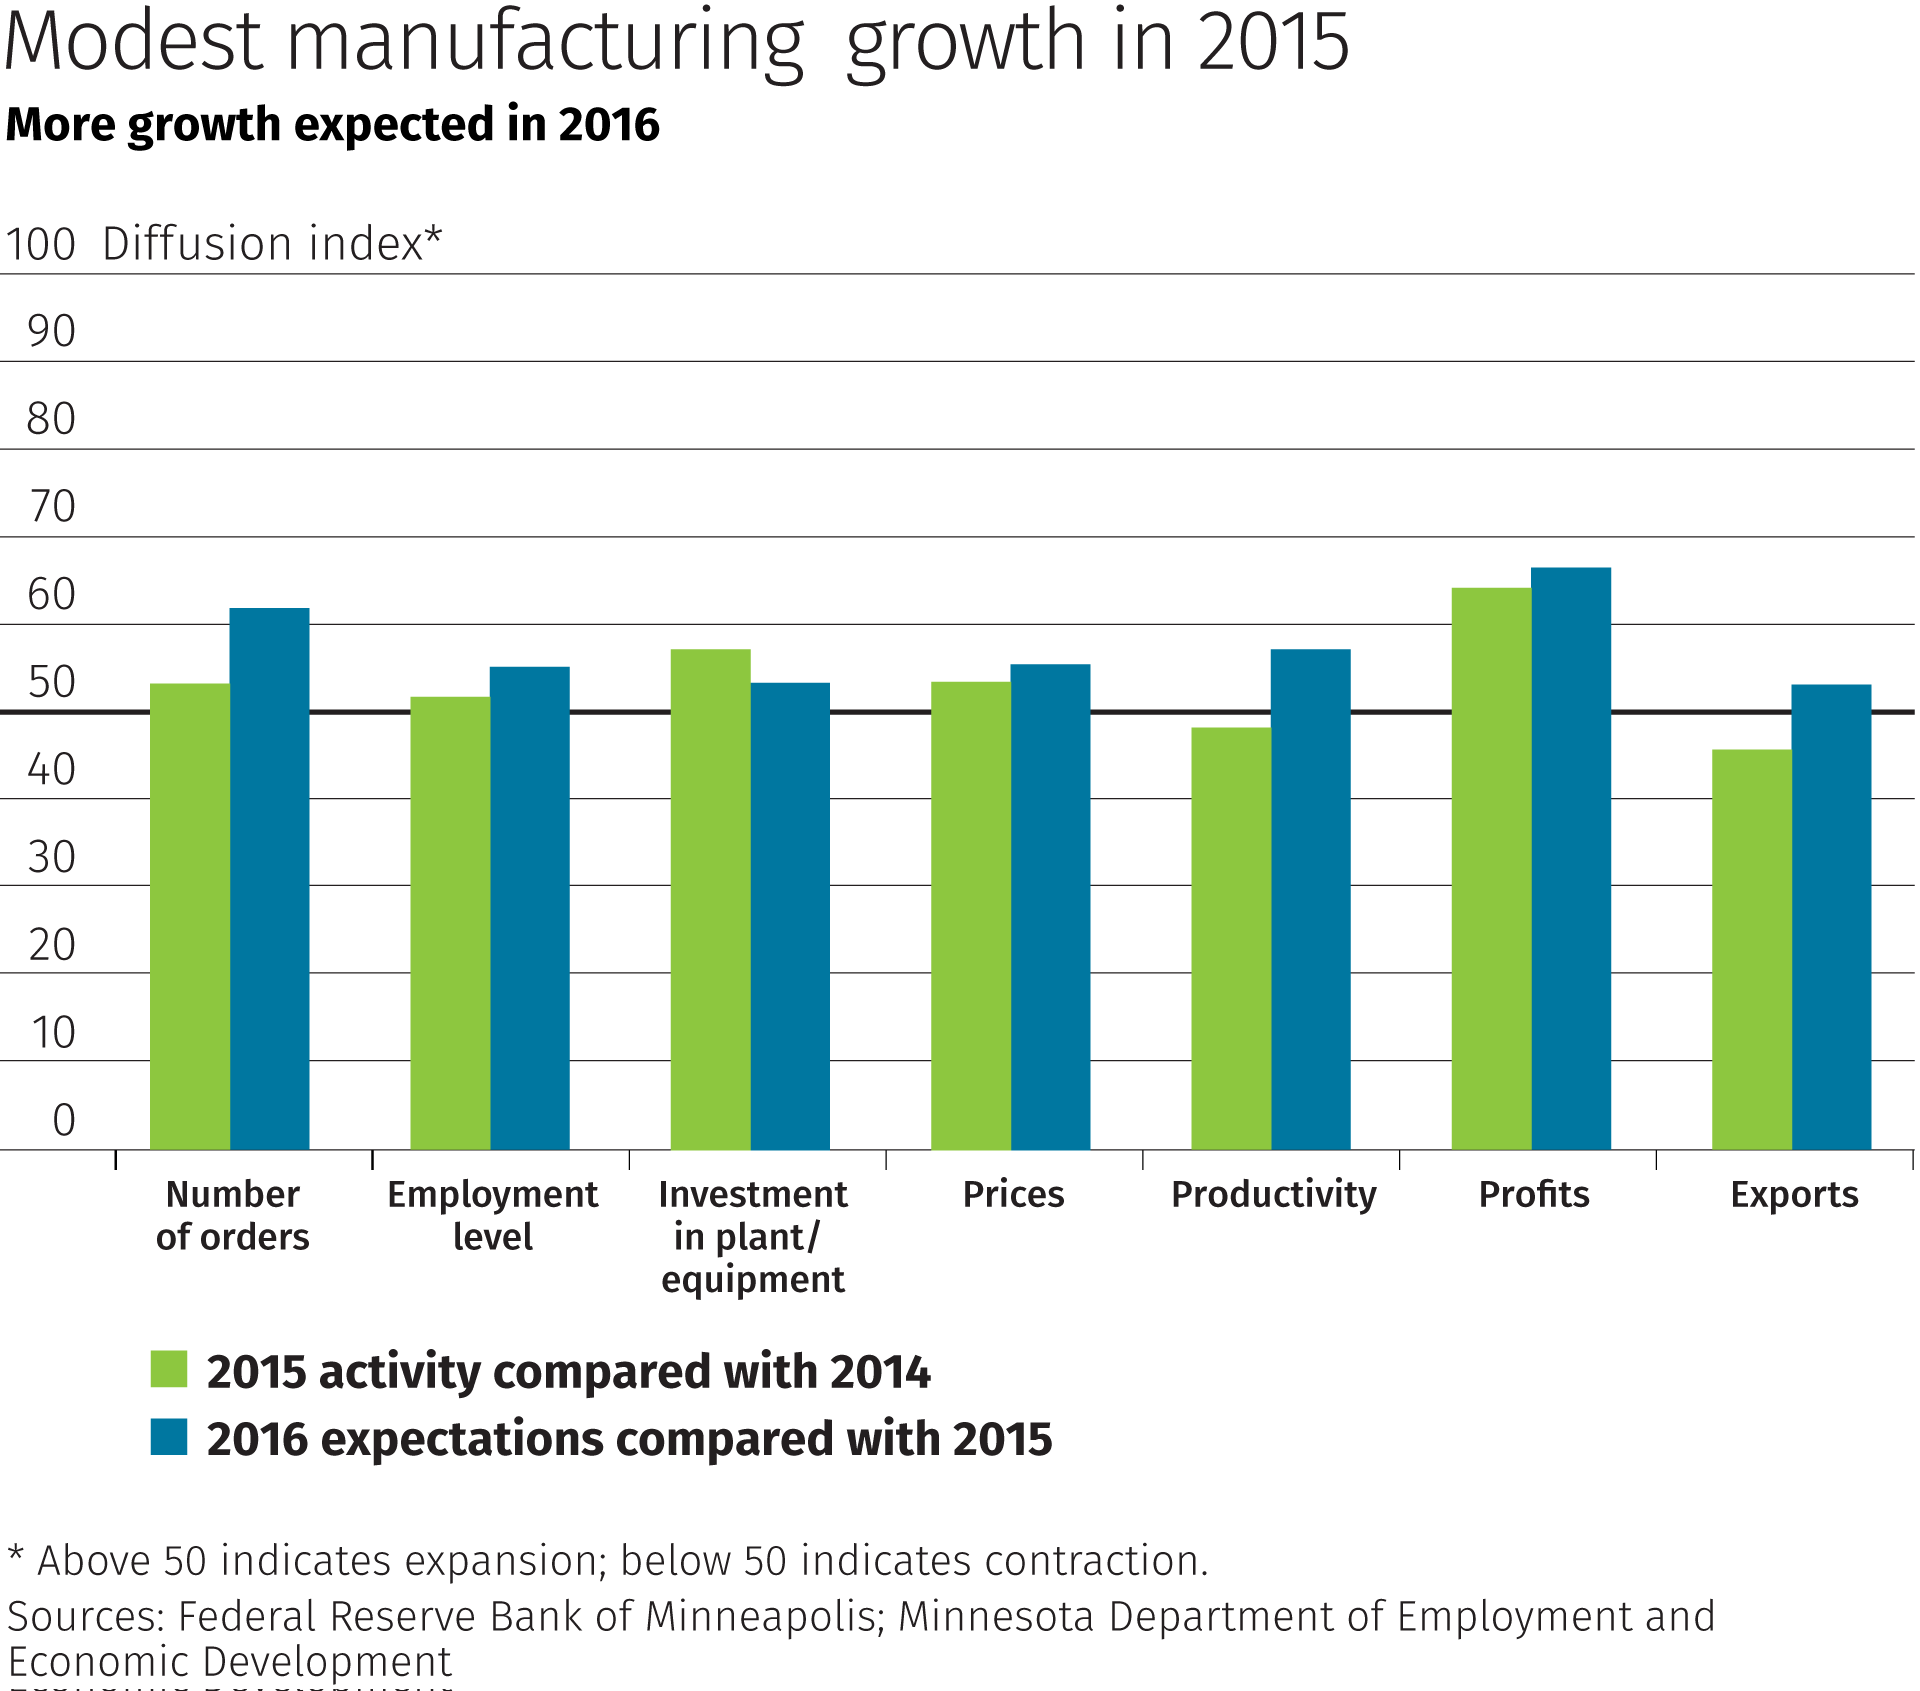 Modest manufacturing growth in 2015